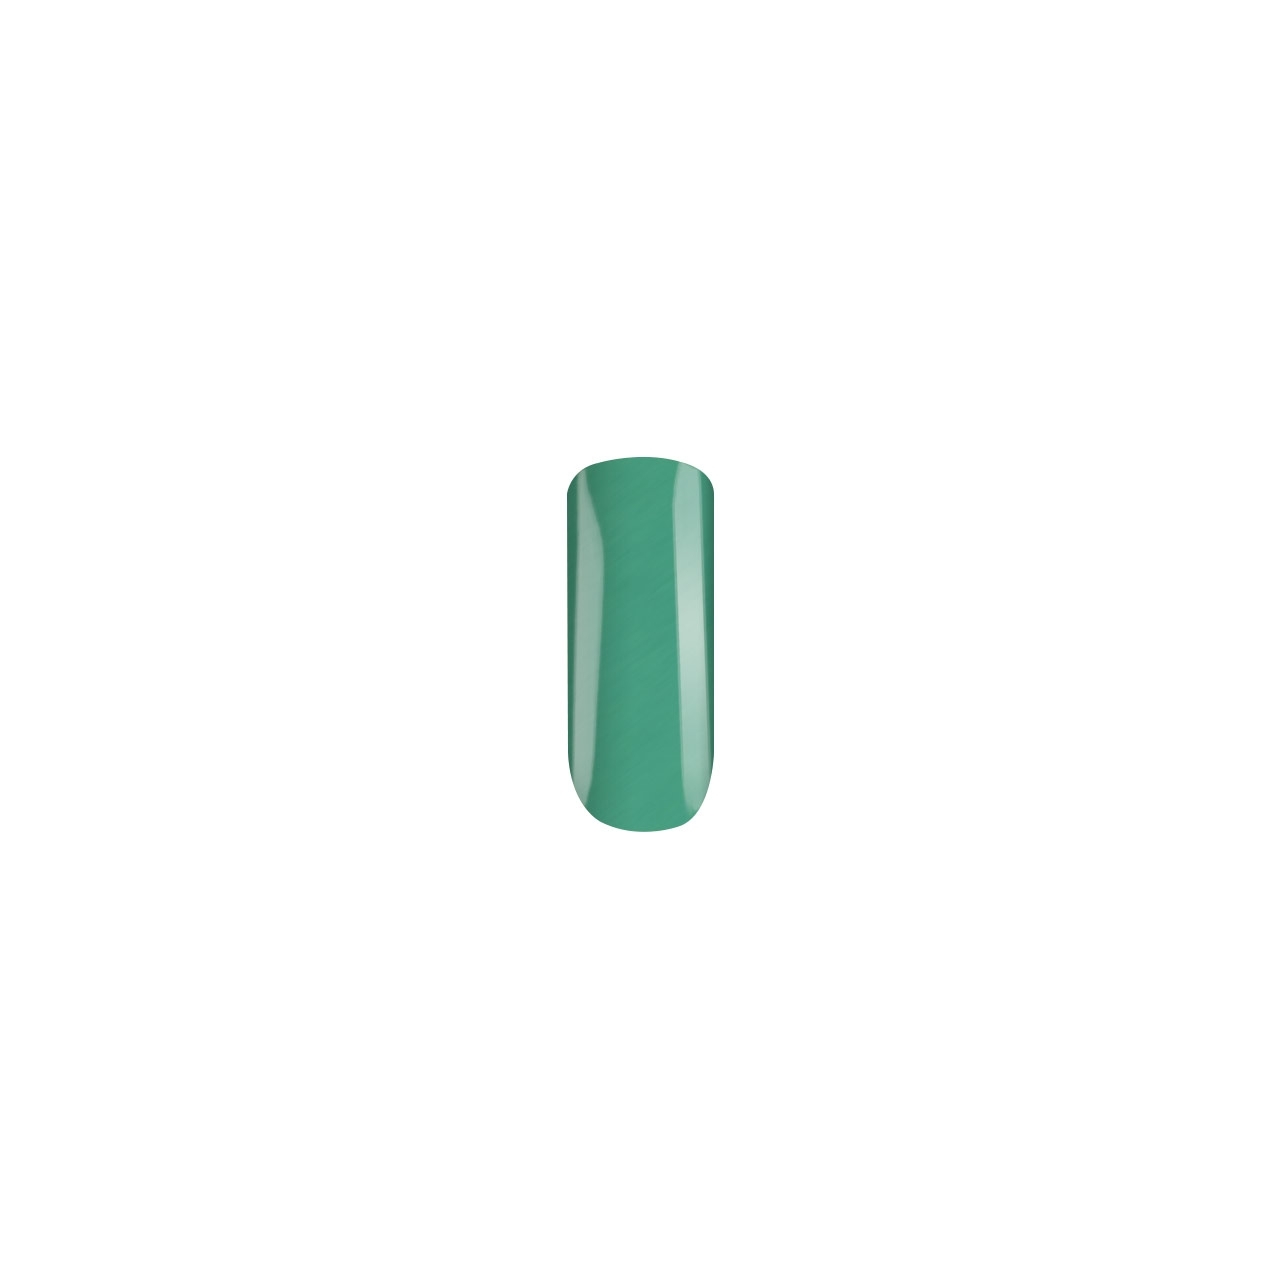 BAEHR BEAUTY CONCEPT - NAILS Nagellack green soft pastell 11 ml